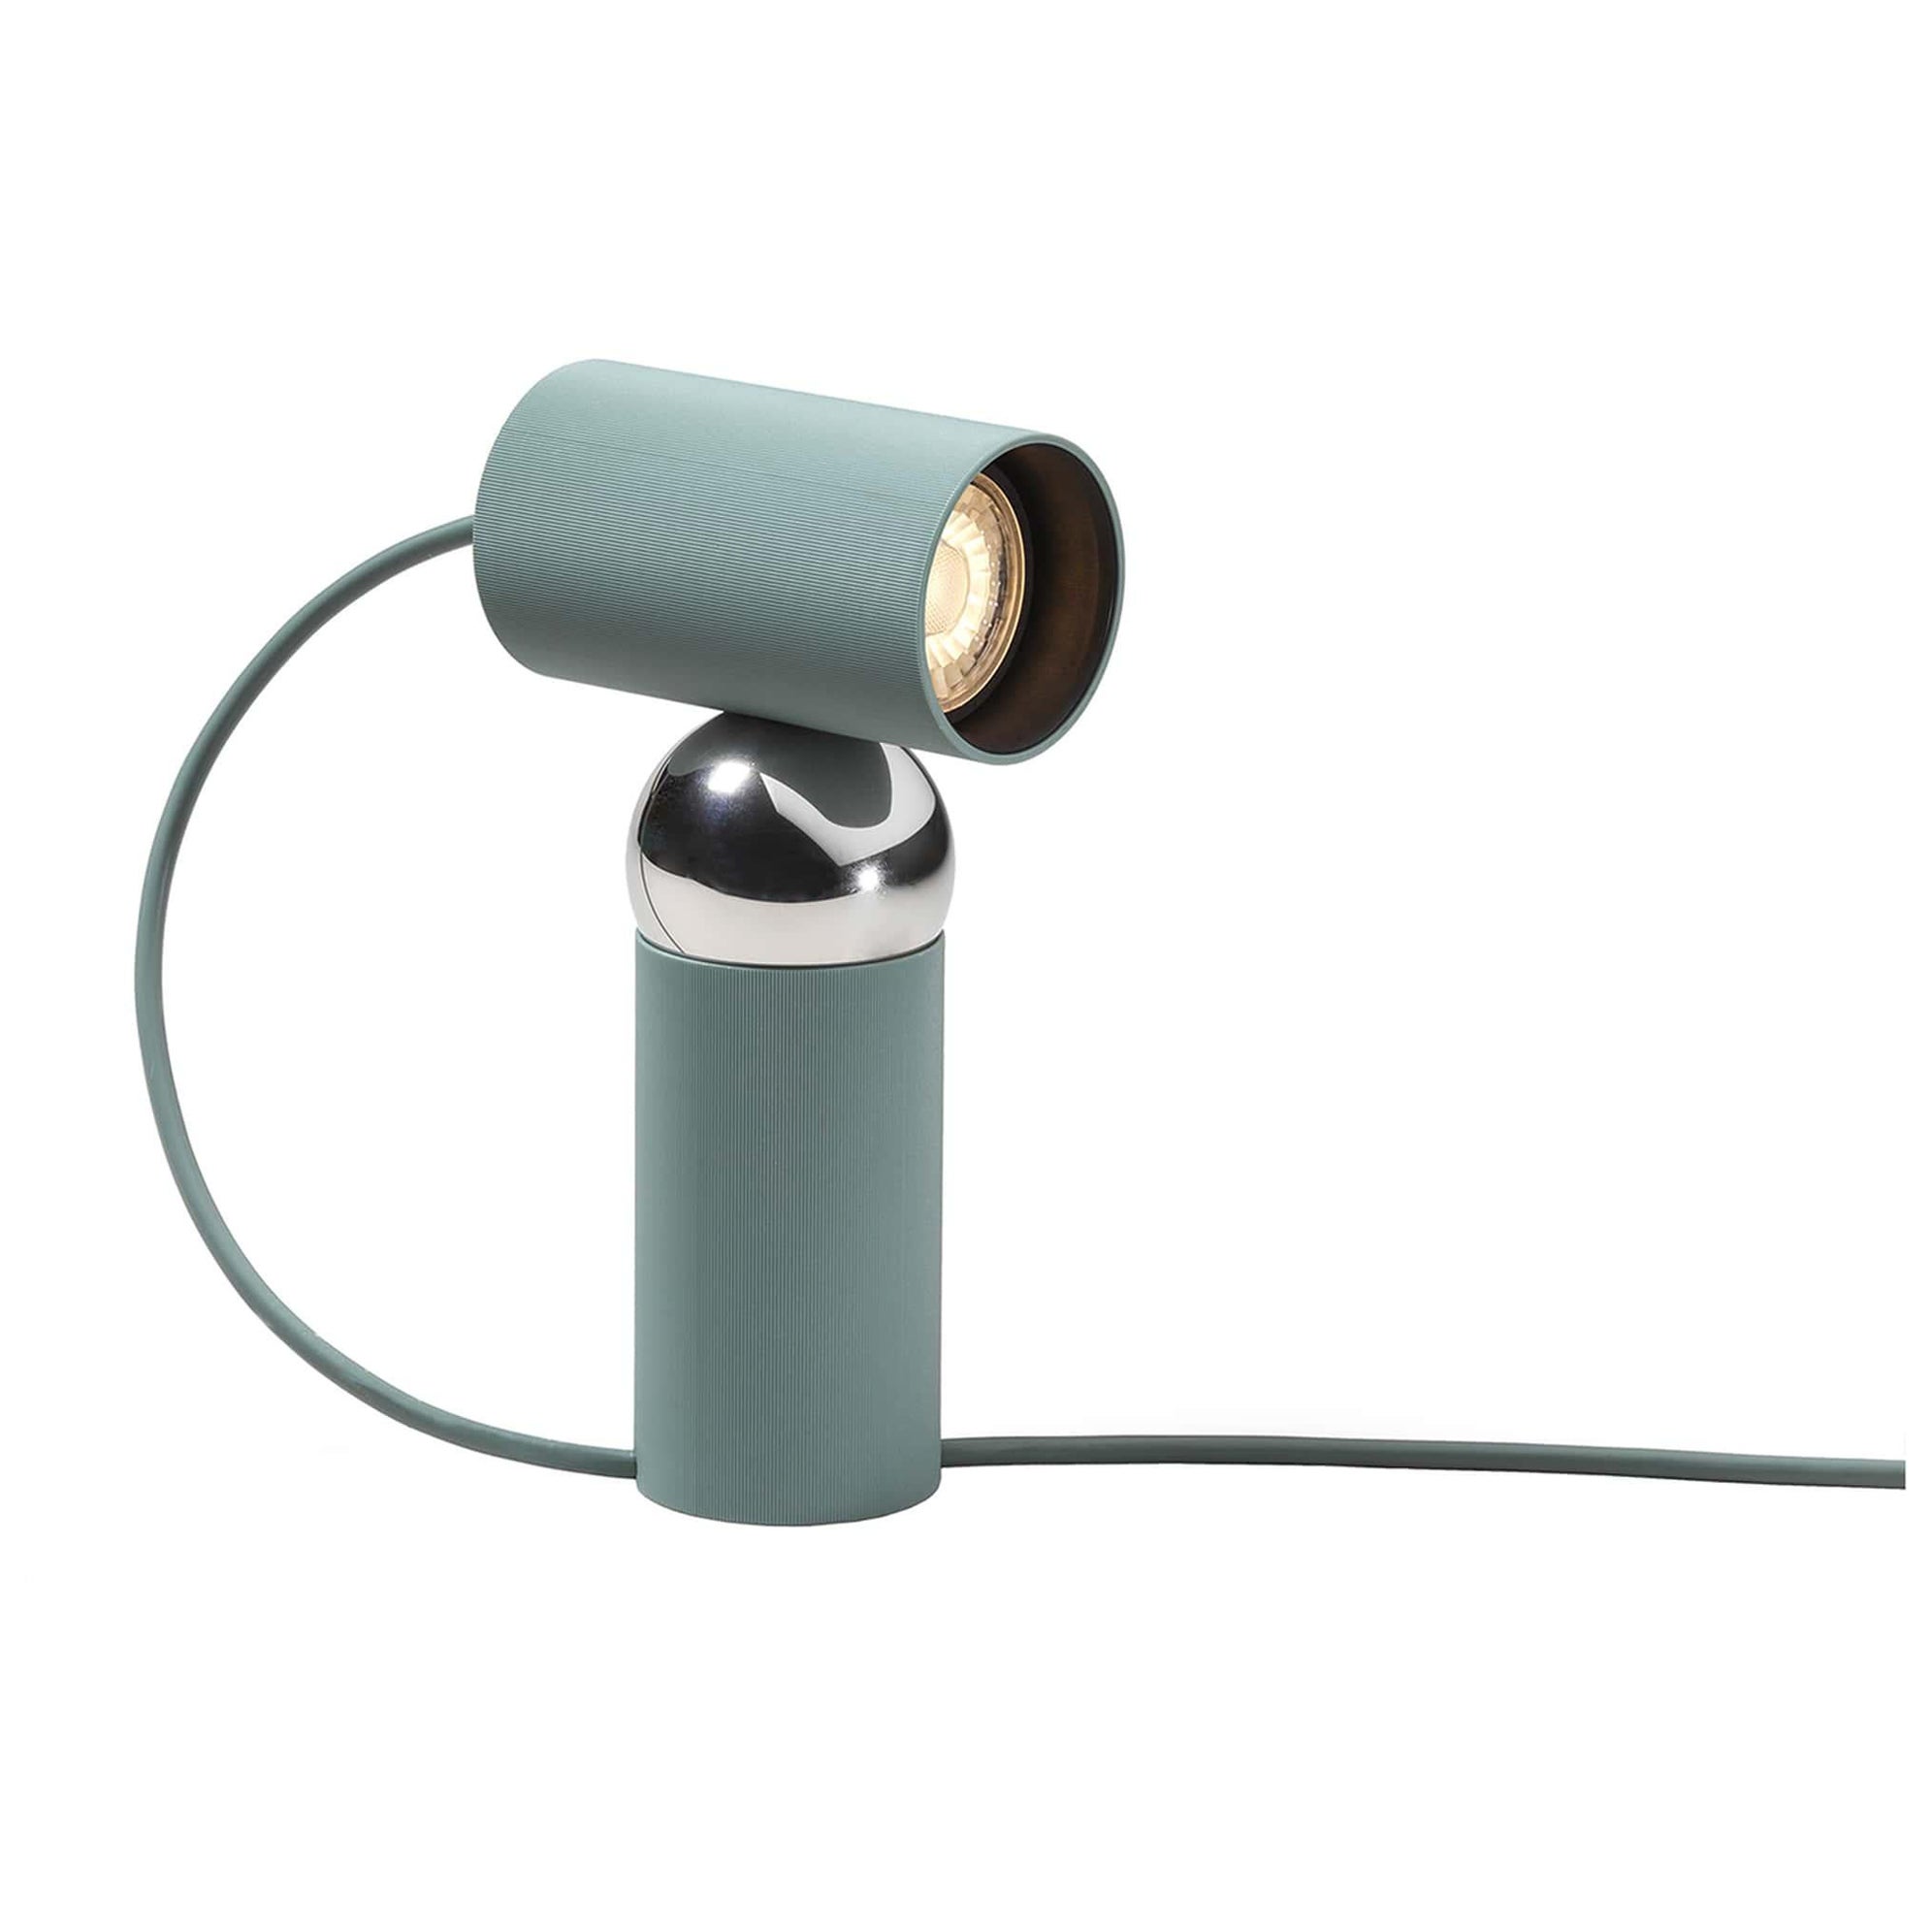 Flos Bilboquet Table Lamp of Polycarbonate and Steel in Sage Color For Sale